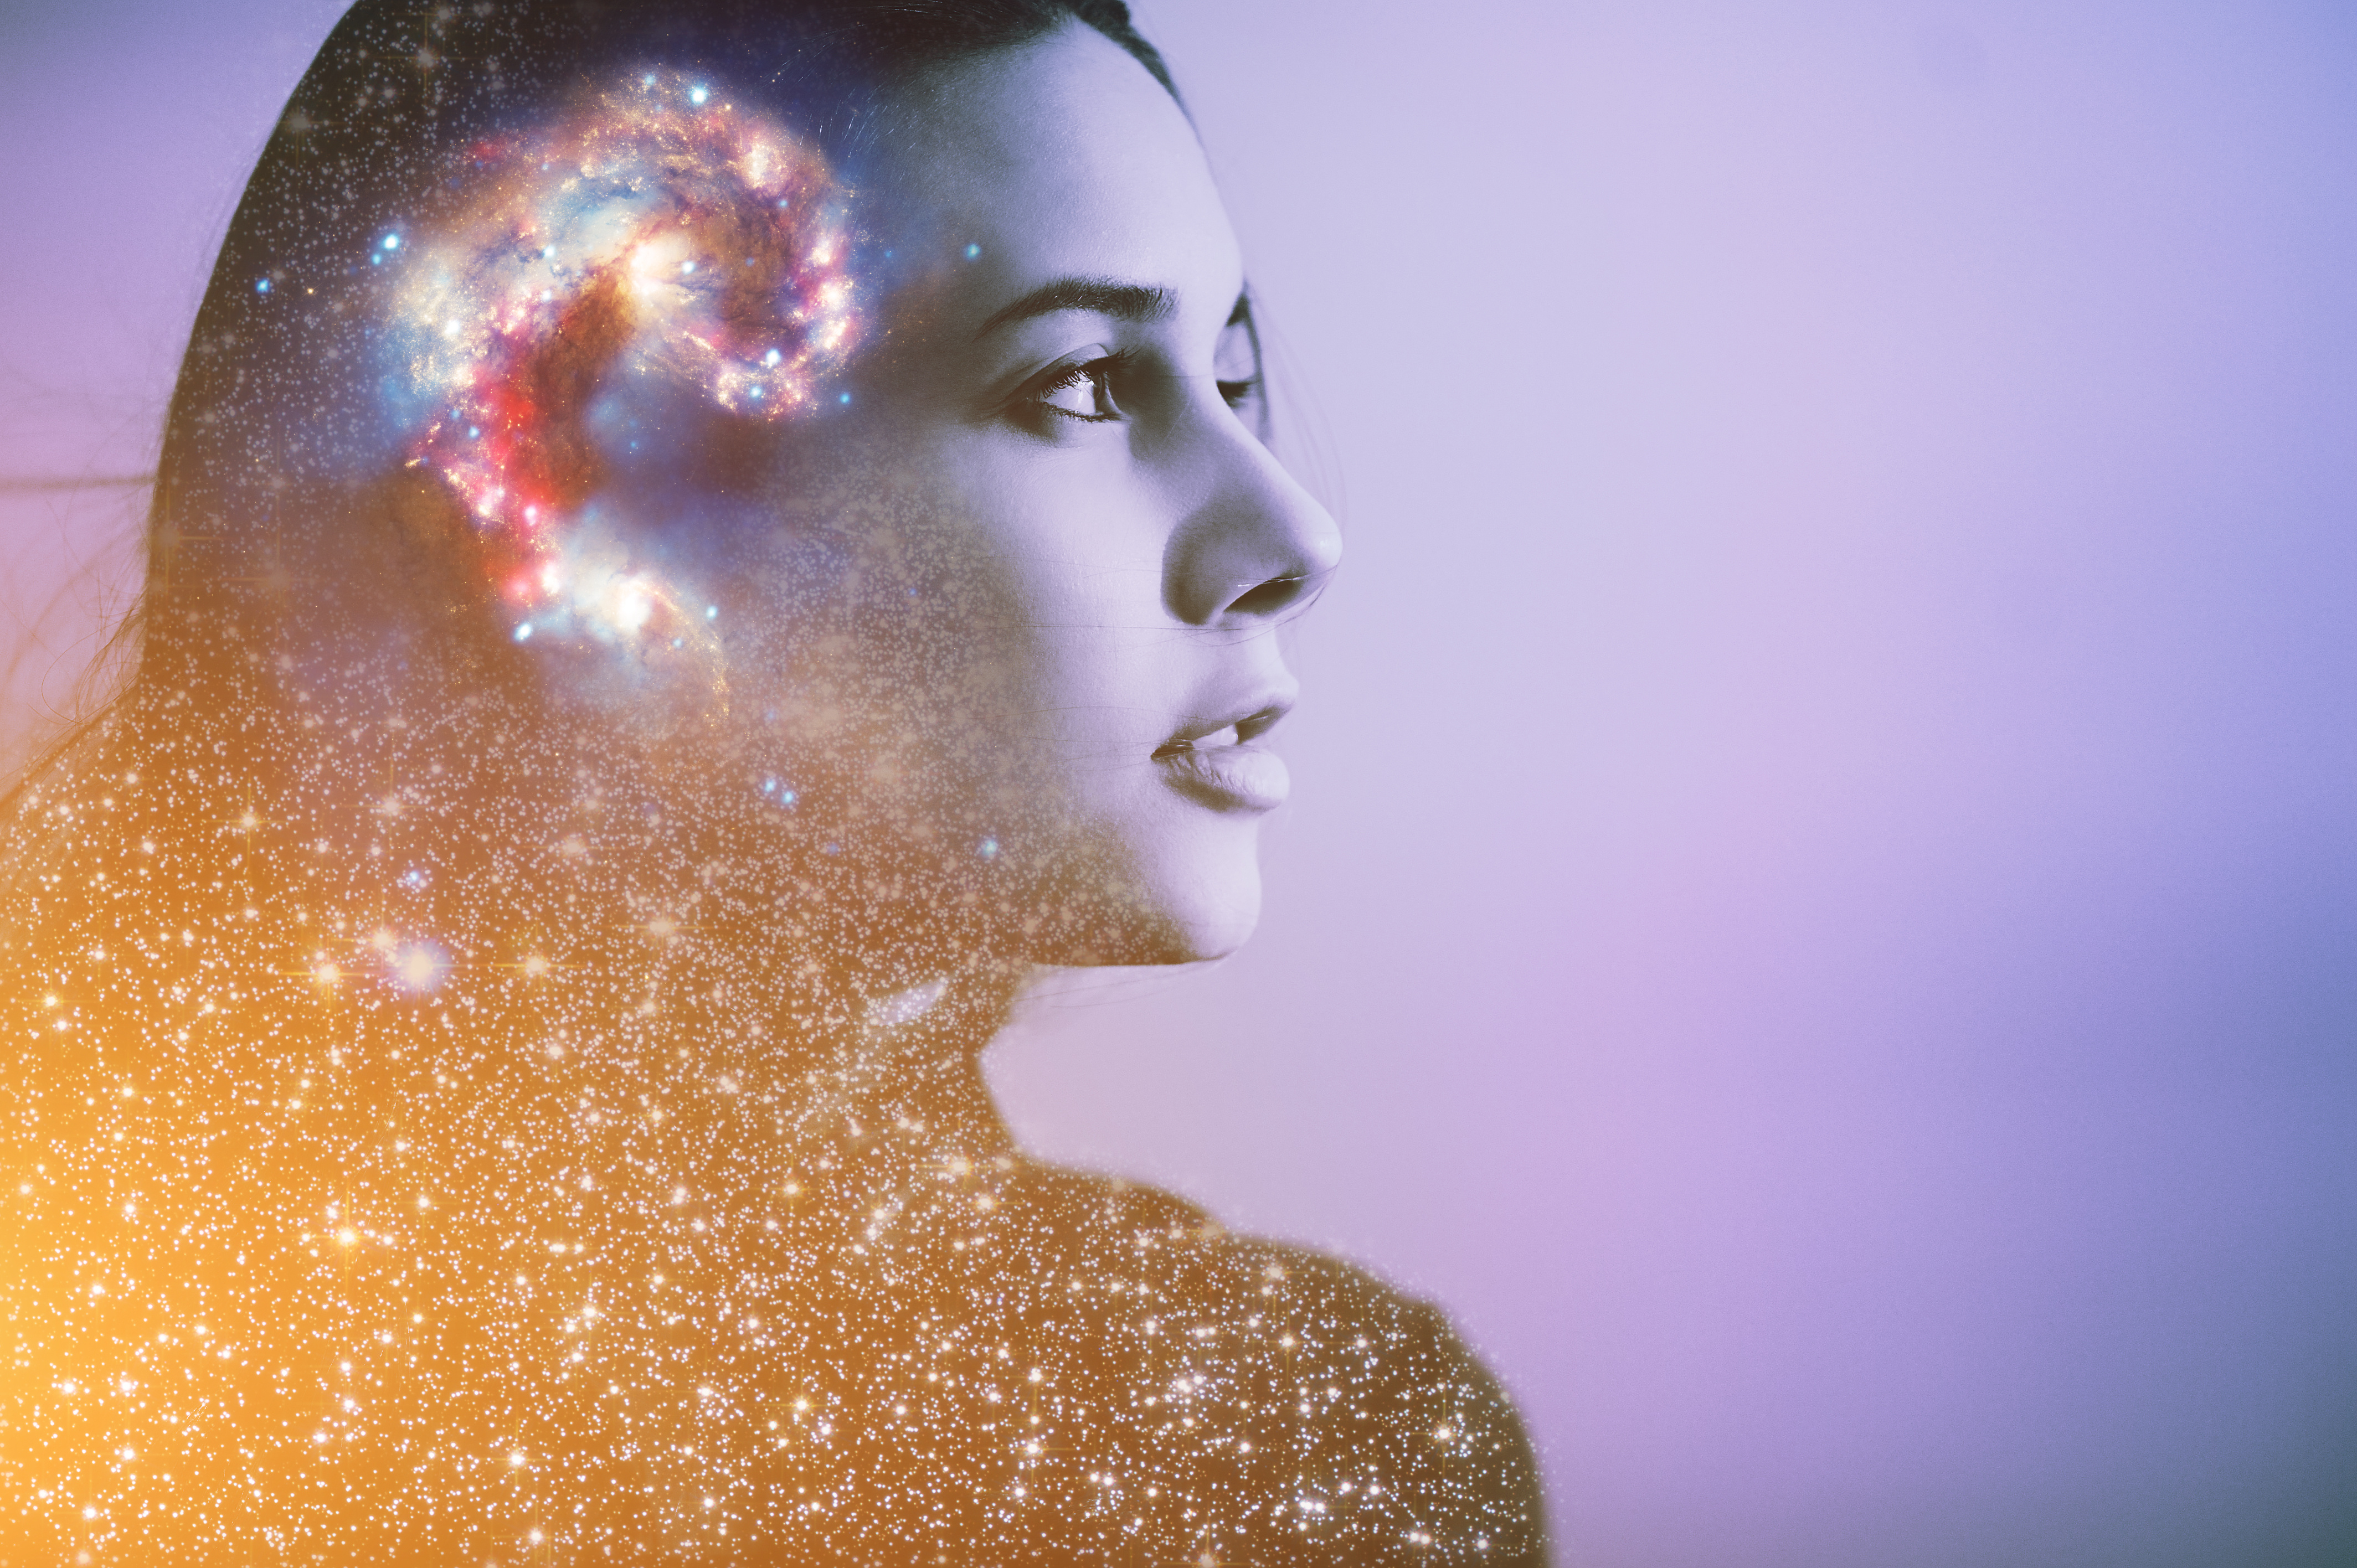 Photo-illustration: at left, a woman's face in profile. The portrait has a heavy blue tint, and images of stars and a galaxy are overlaid across the woman's hair and shoulders.